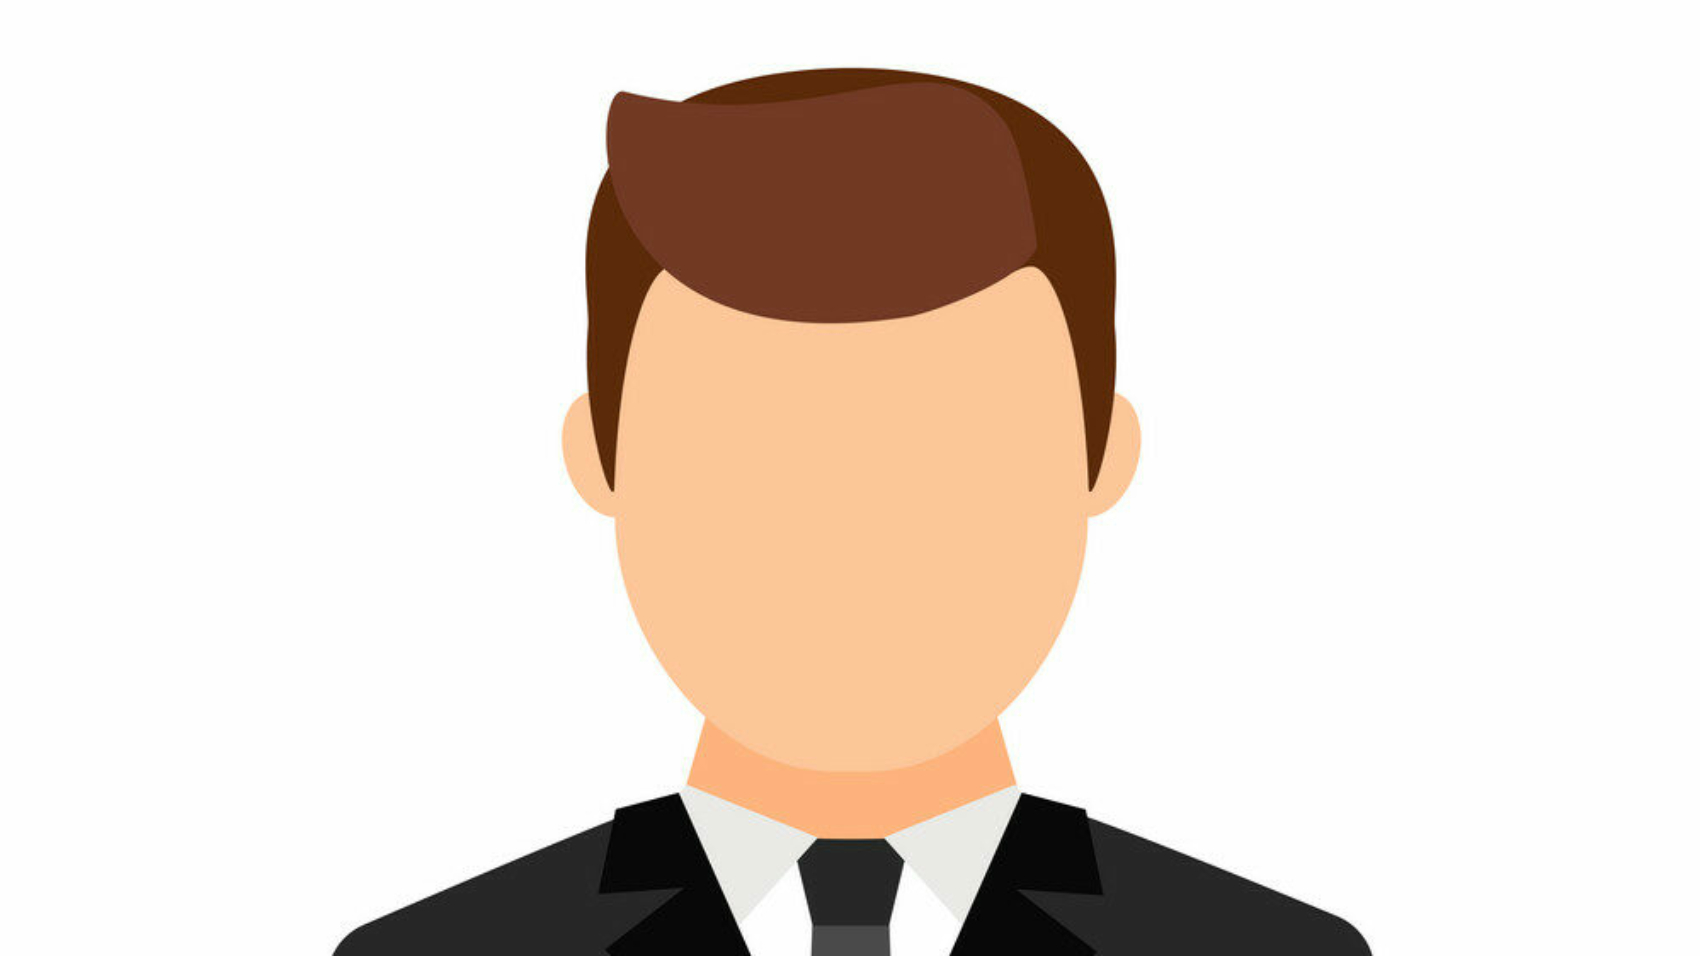 Avatar, portrait of a man without a face in a suit and tie. Vector flat illustration.